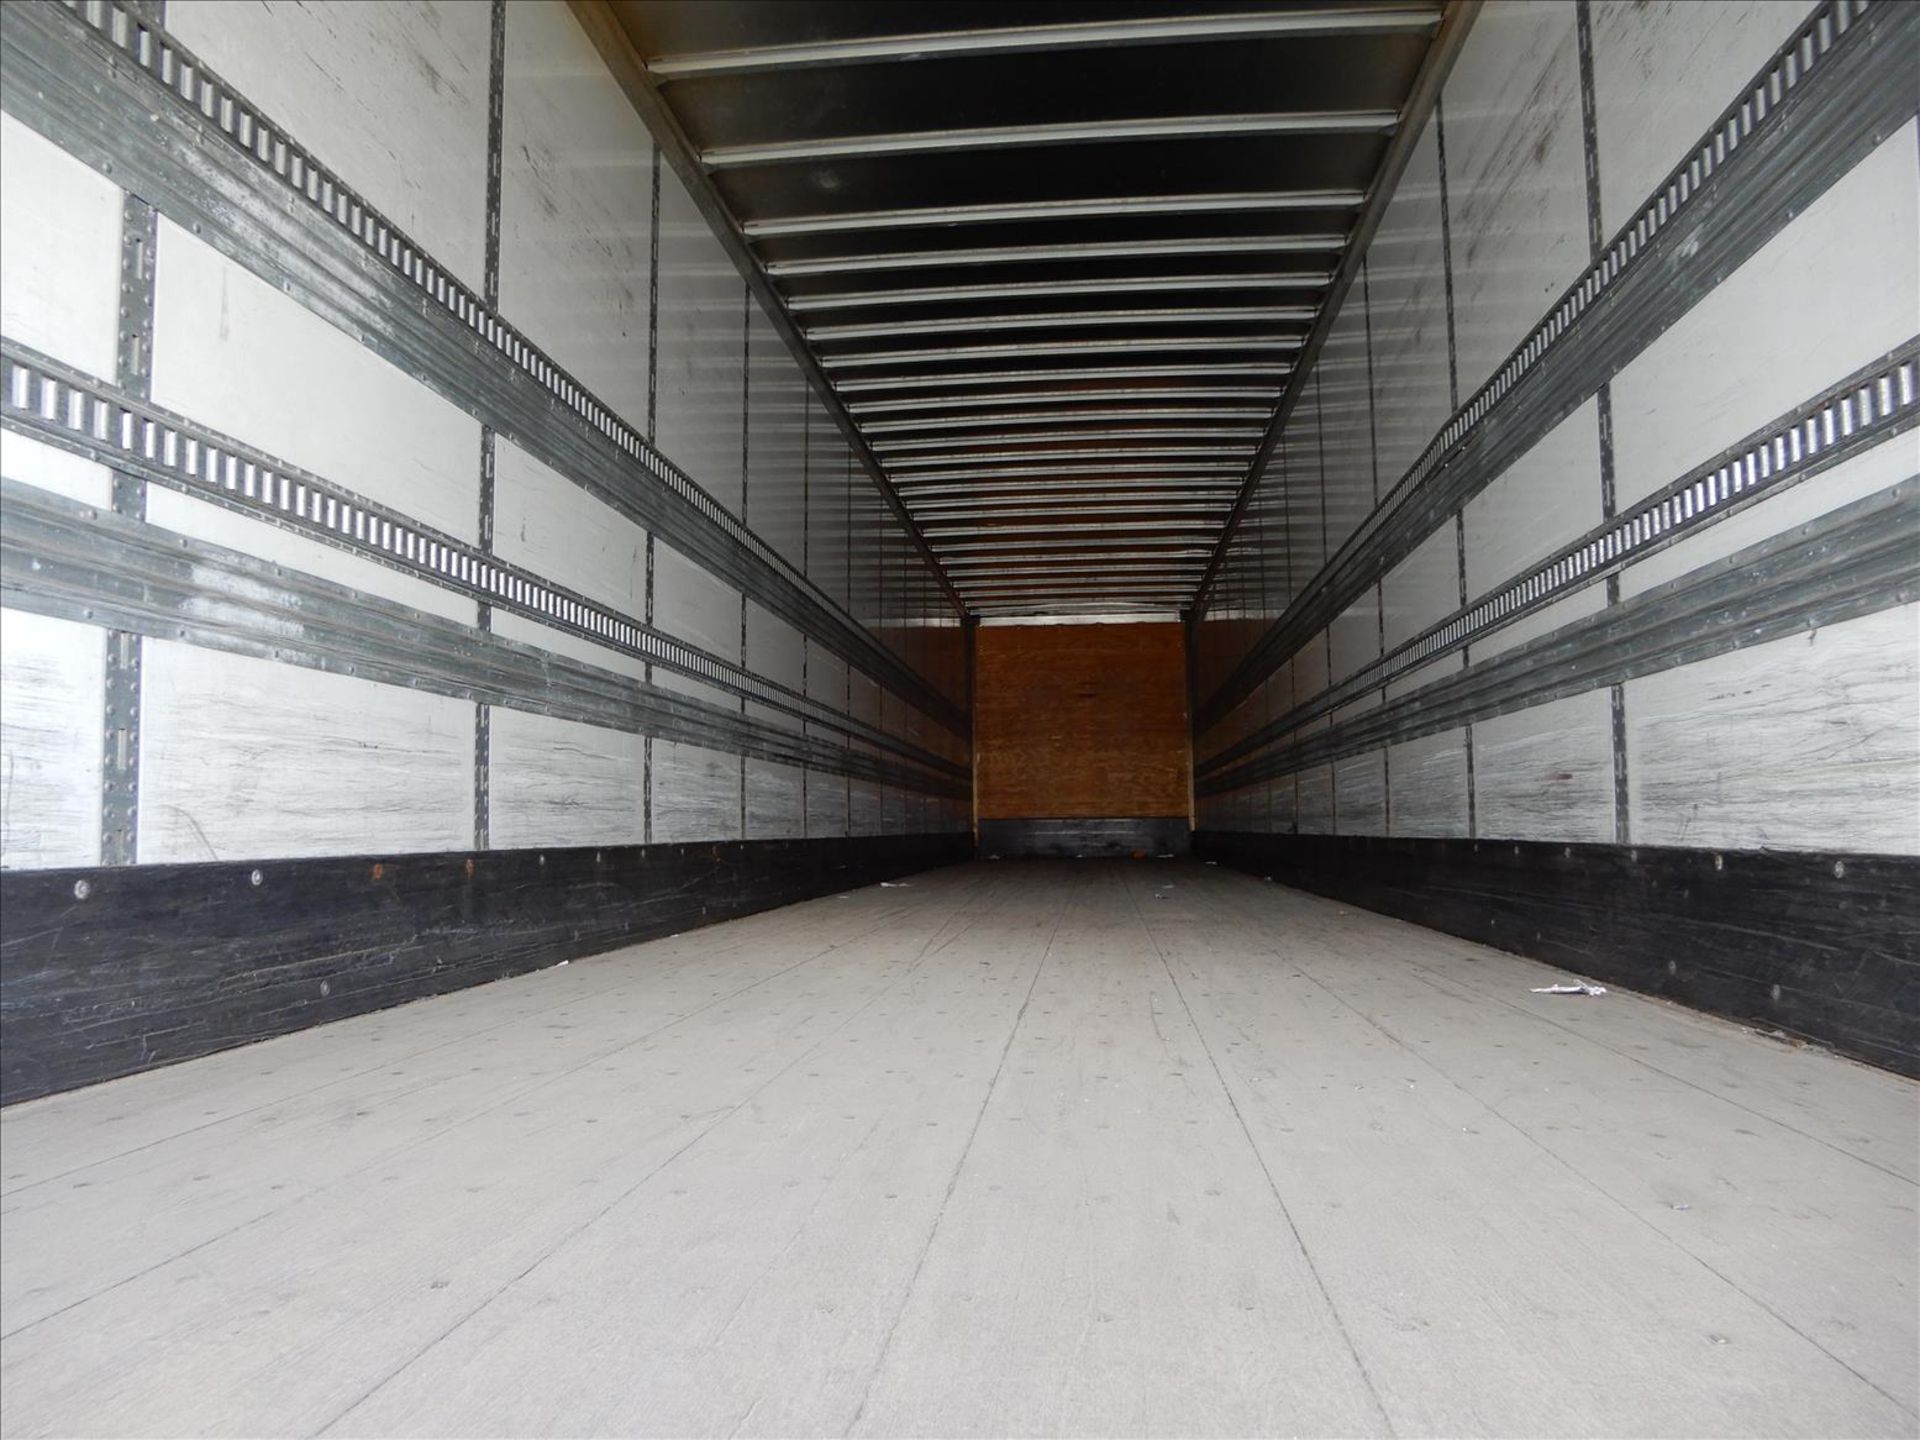 2012 Stoughton Trailer - Located in Indianapolis, IN - Image 22 of 31